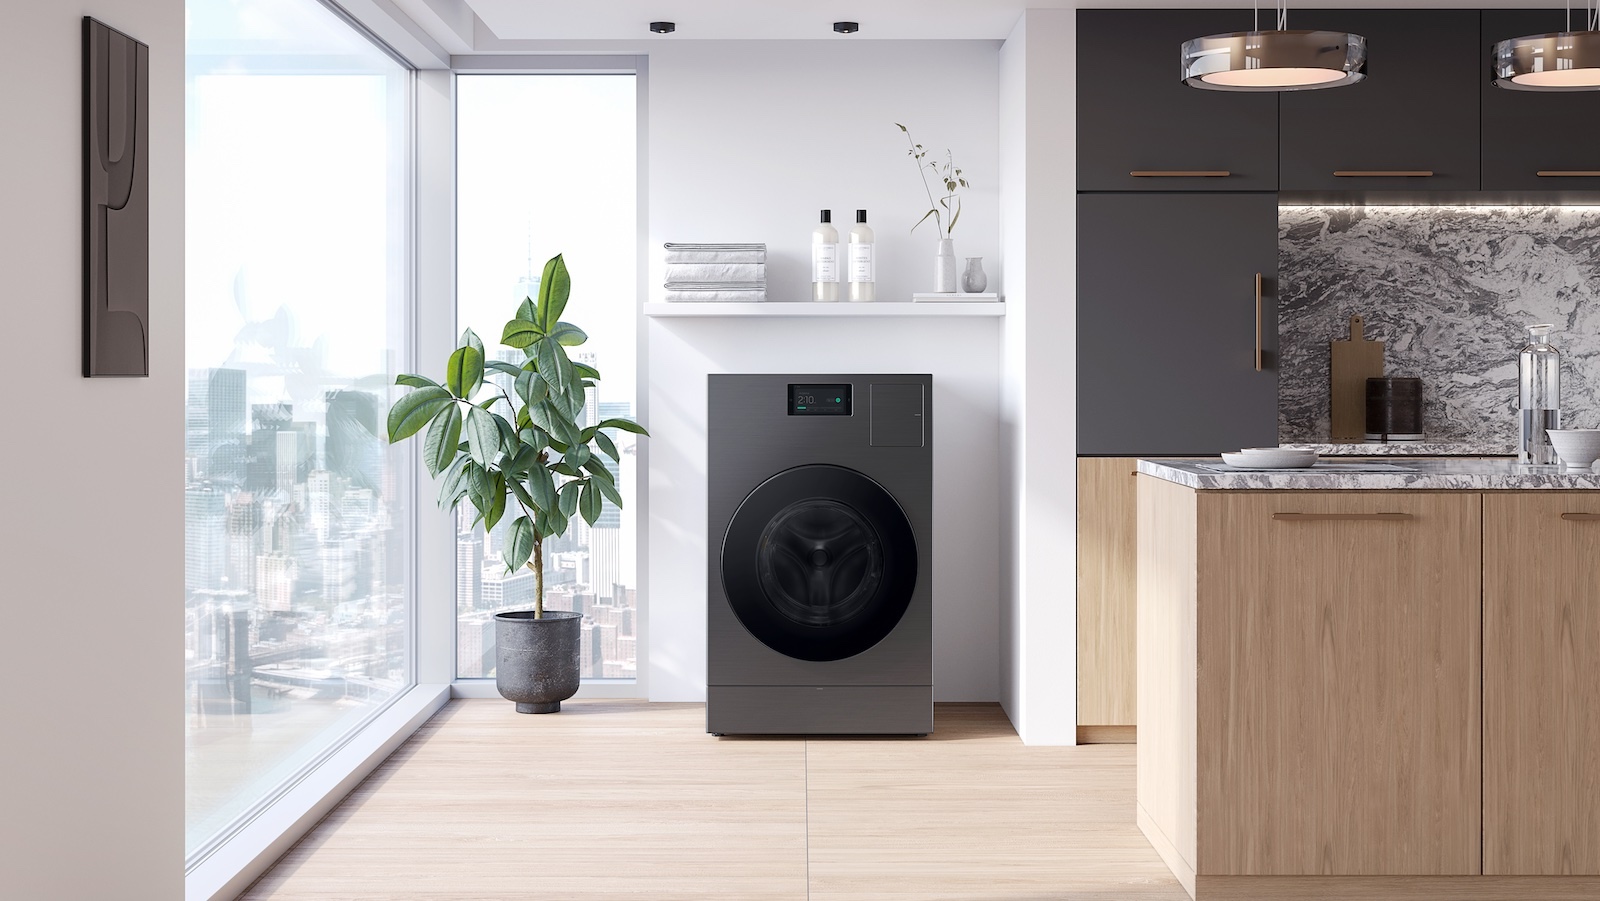 The Samsung Bespoke AI Laundry Combo is a washer and dryer